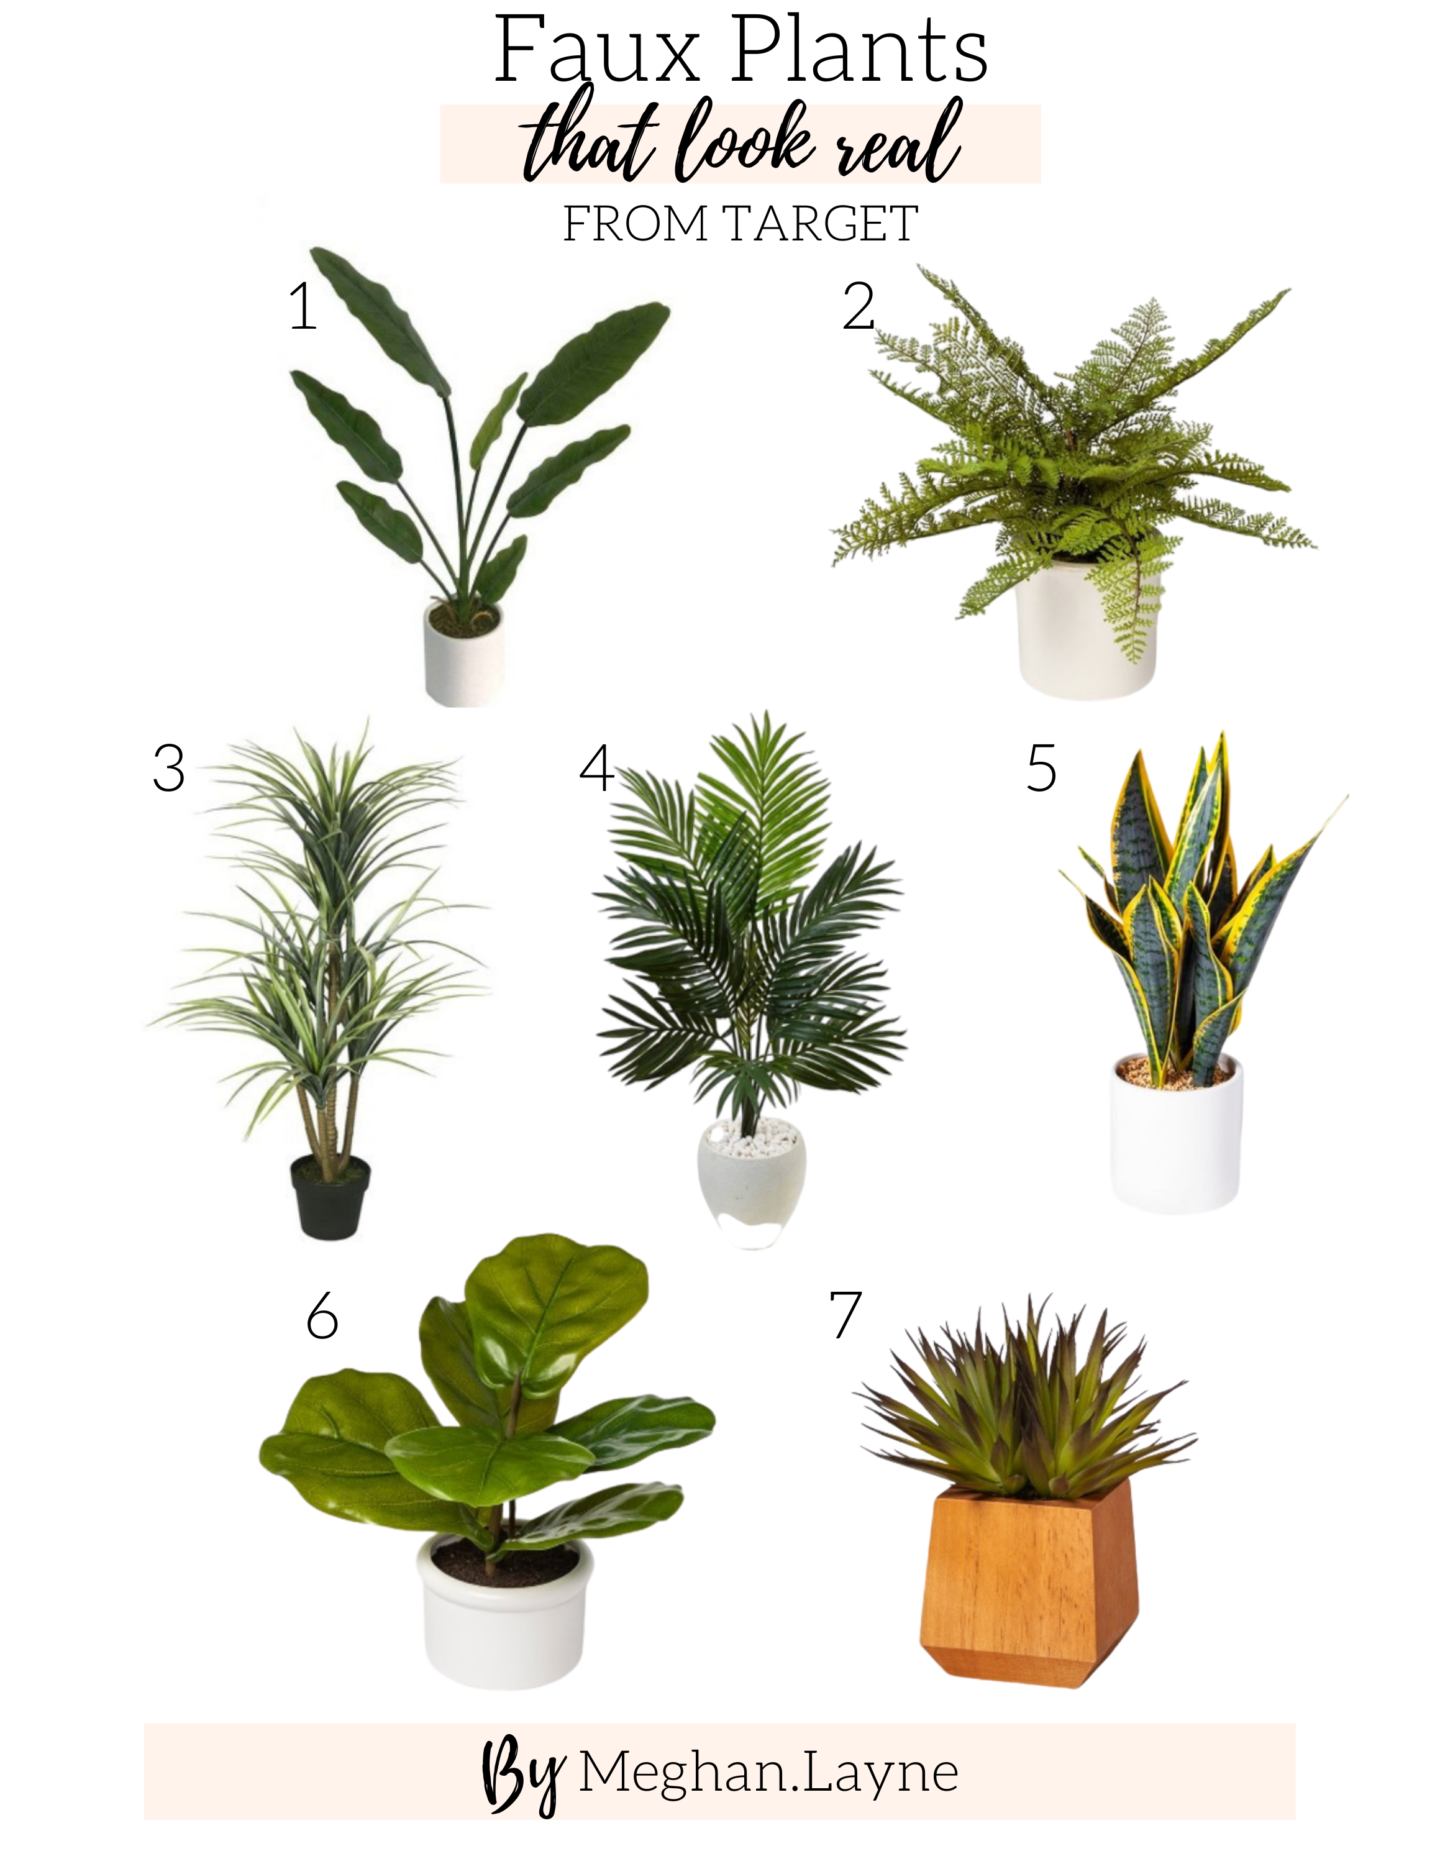 Faux Plants that Look Real from Target - Cirque du SoLayne